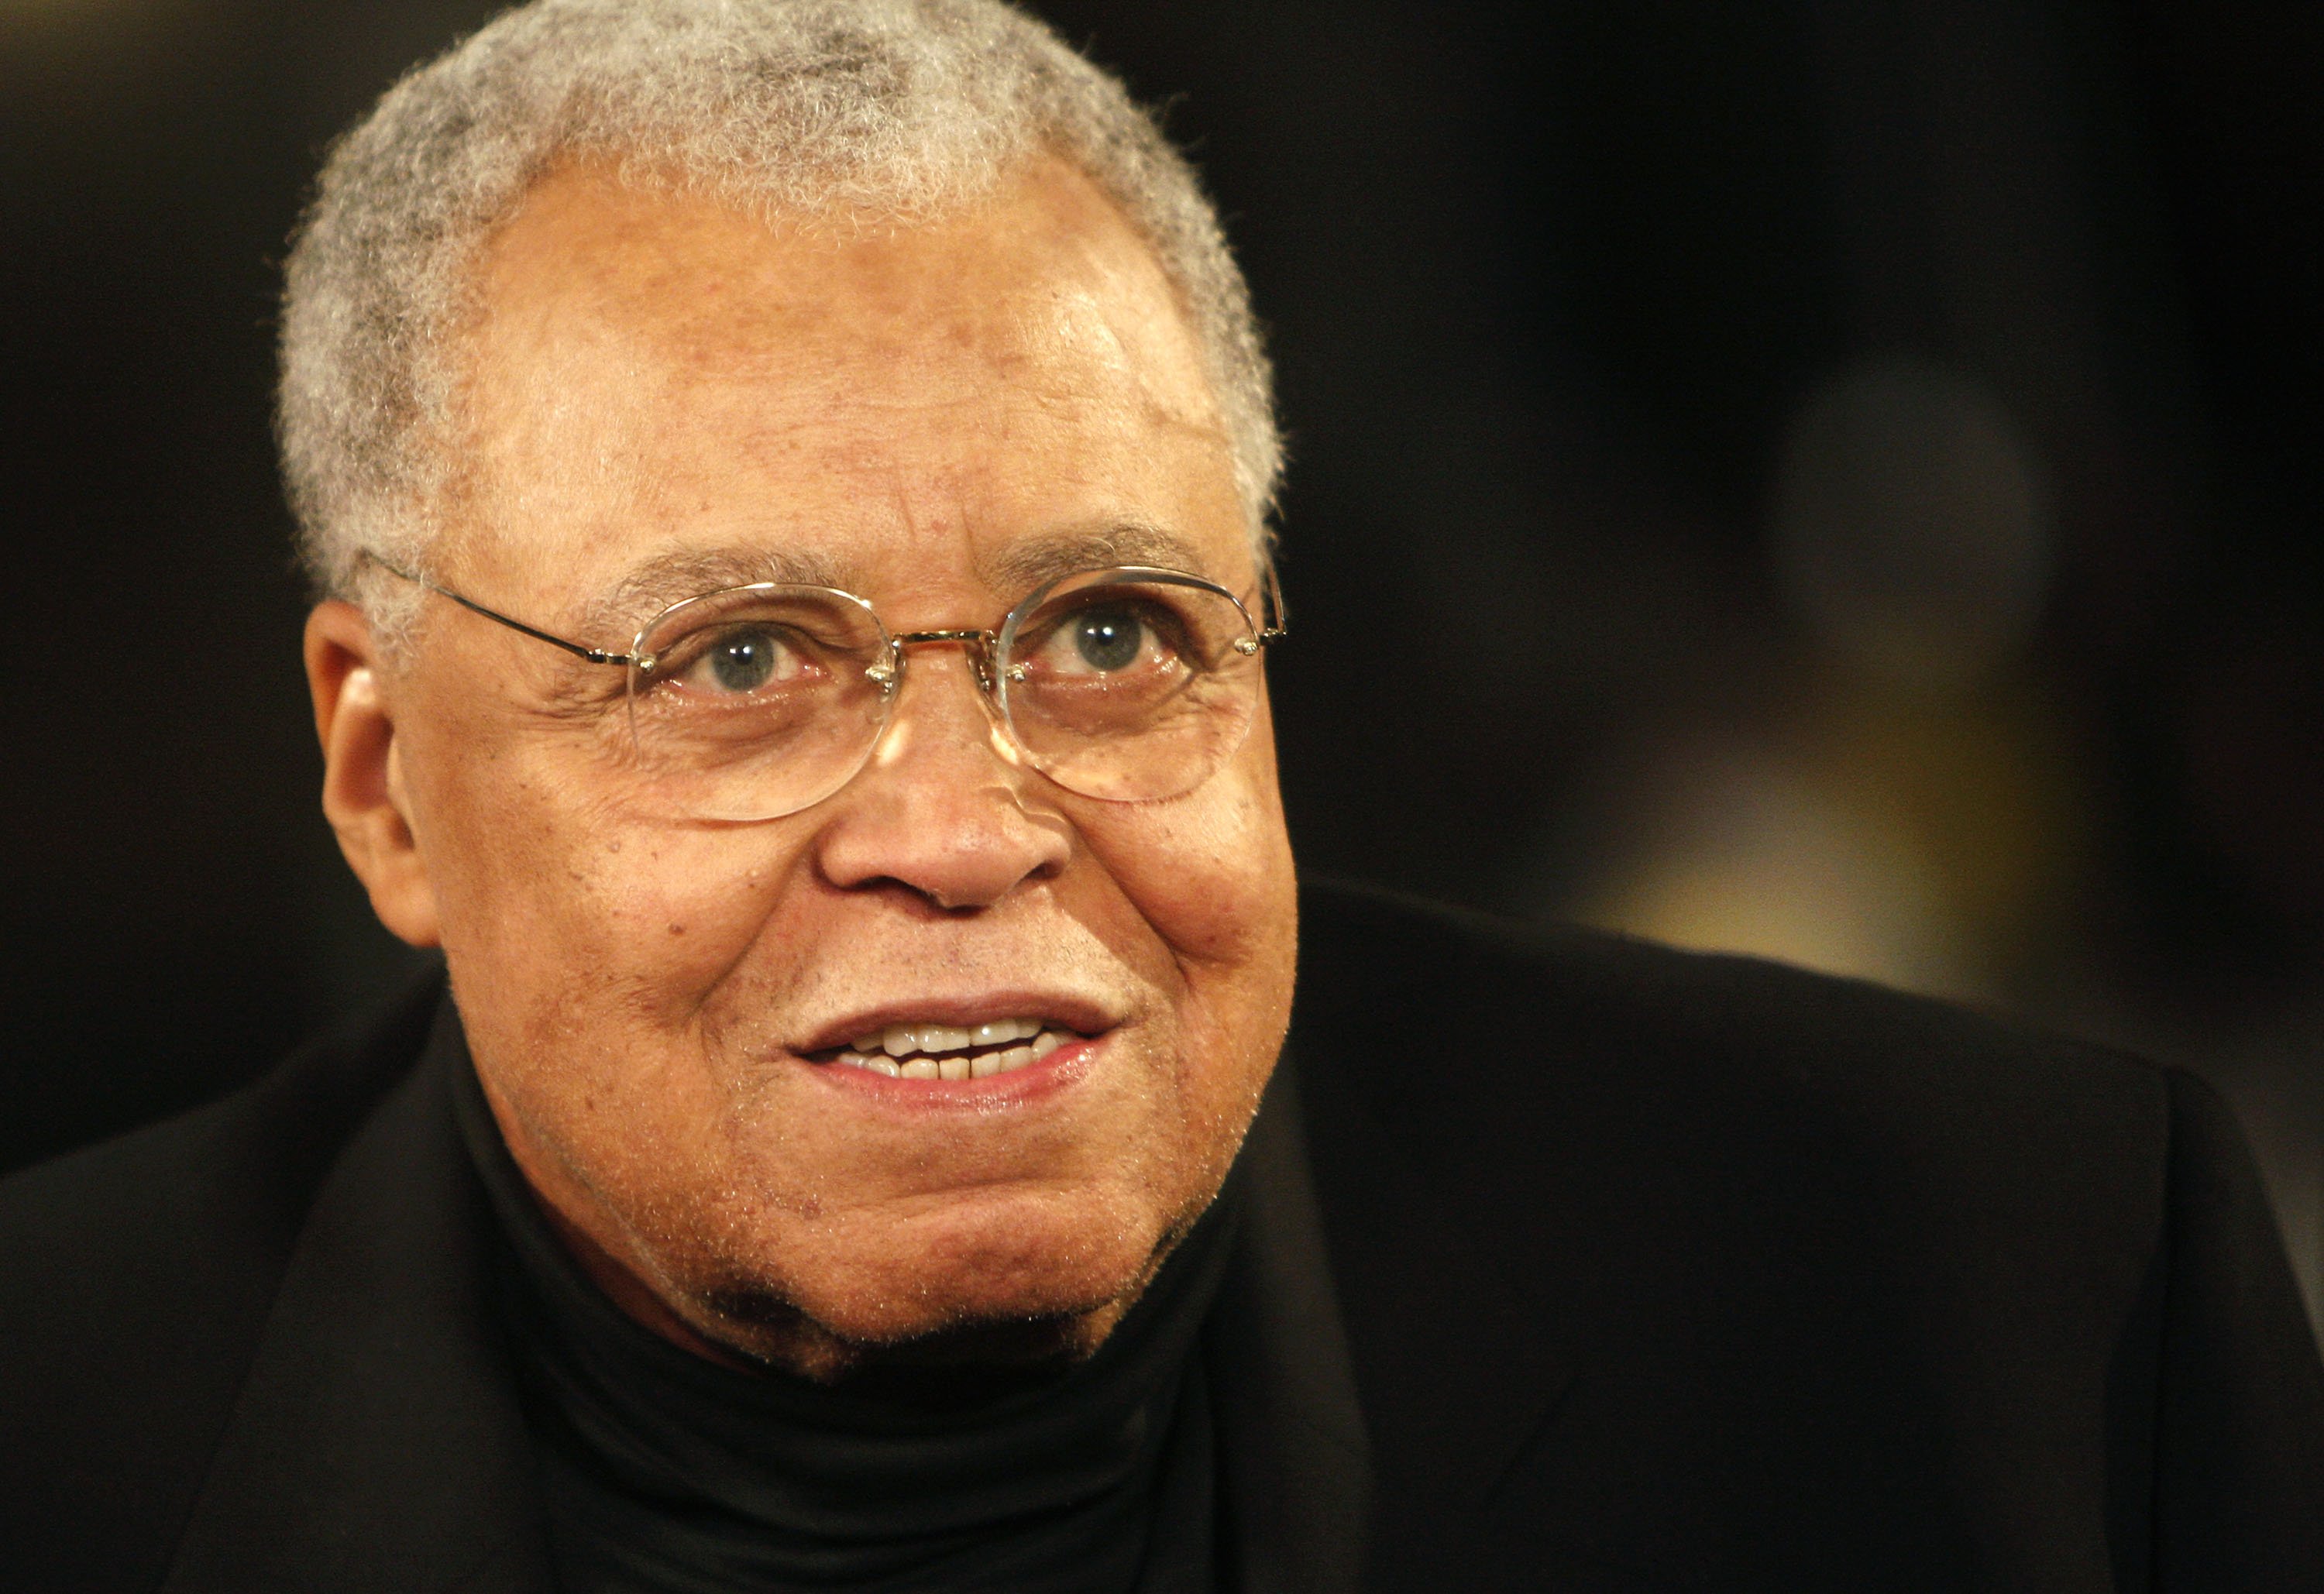 James Earl Jones at rehearsals for the 2009 Screen Actors Guild Awards at the Shrine Auditorium on January 24, 2009 in Los Angeles, California | Source: Getty Images